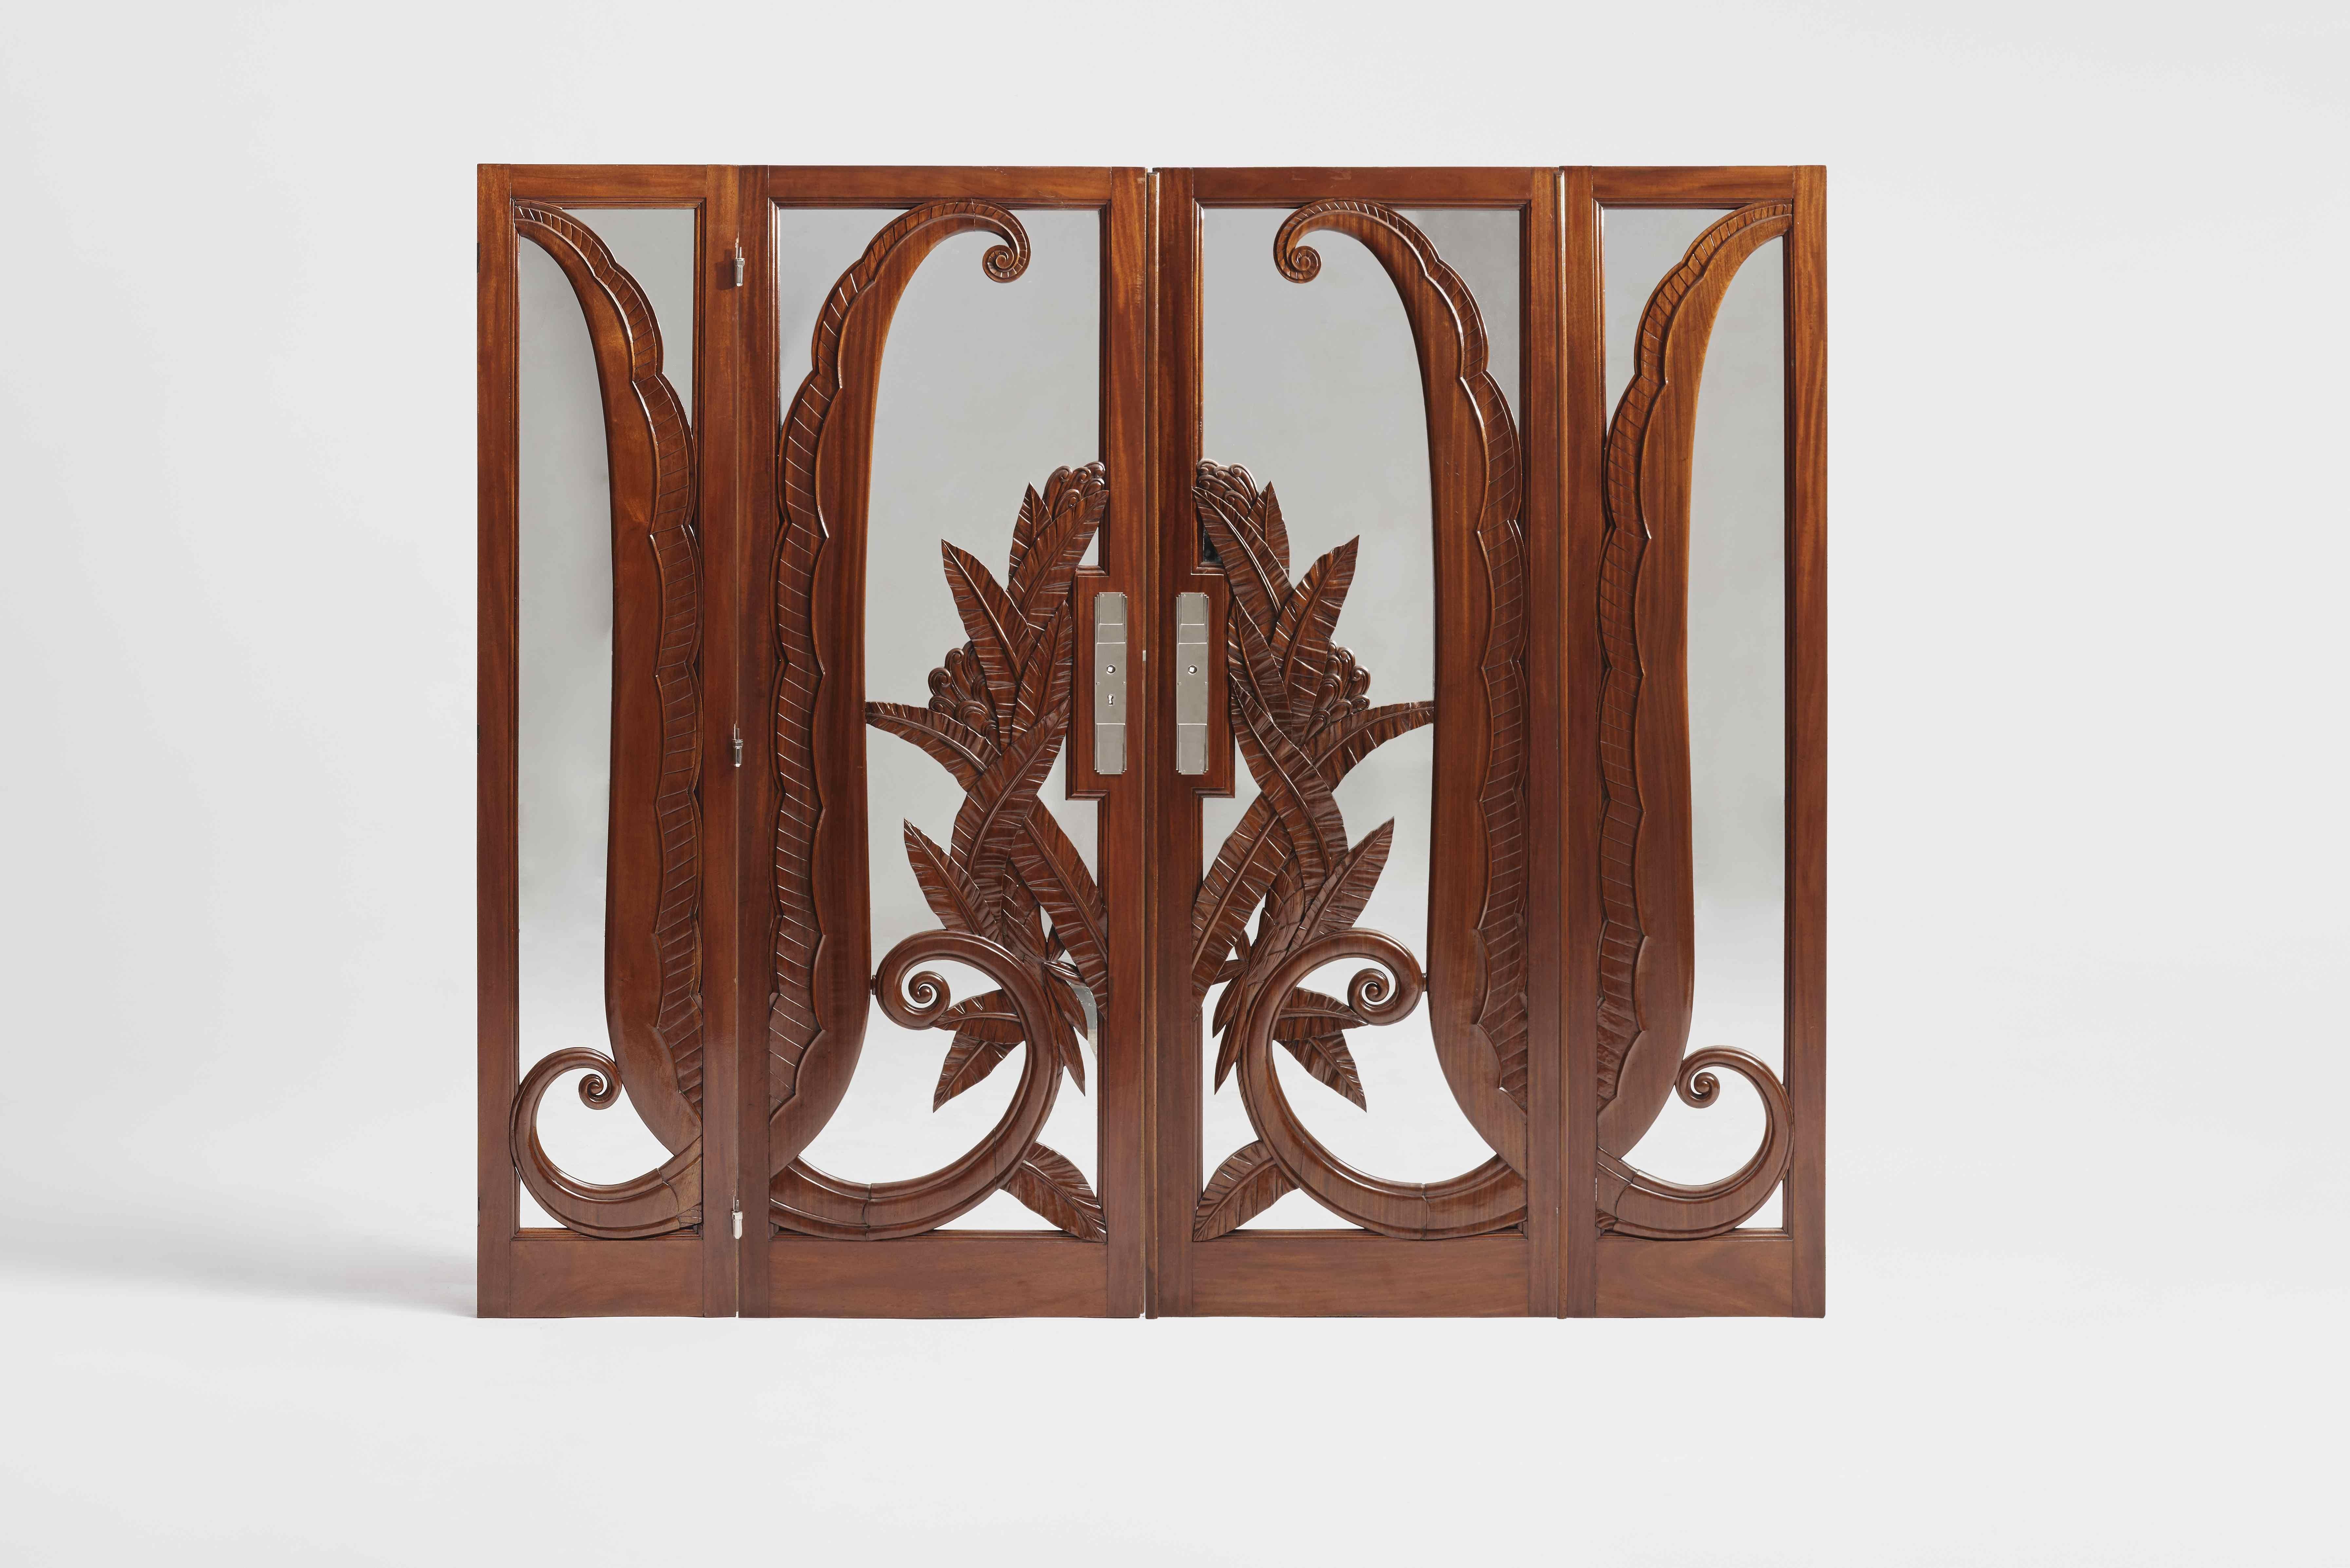 Pair of Art Deco Mirrored and Carved Doors, Paul Moreau-Vauthier, France, 1926 In Good Condition For Sale In New York, NY